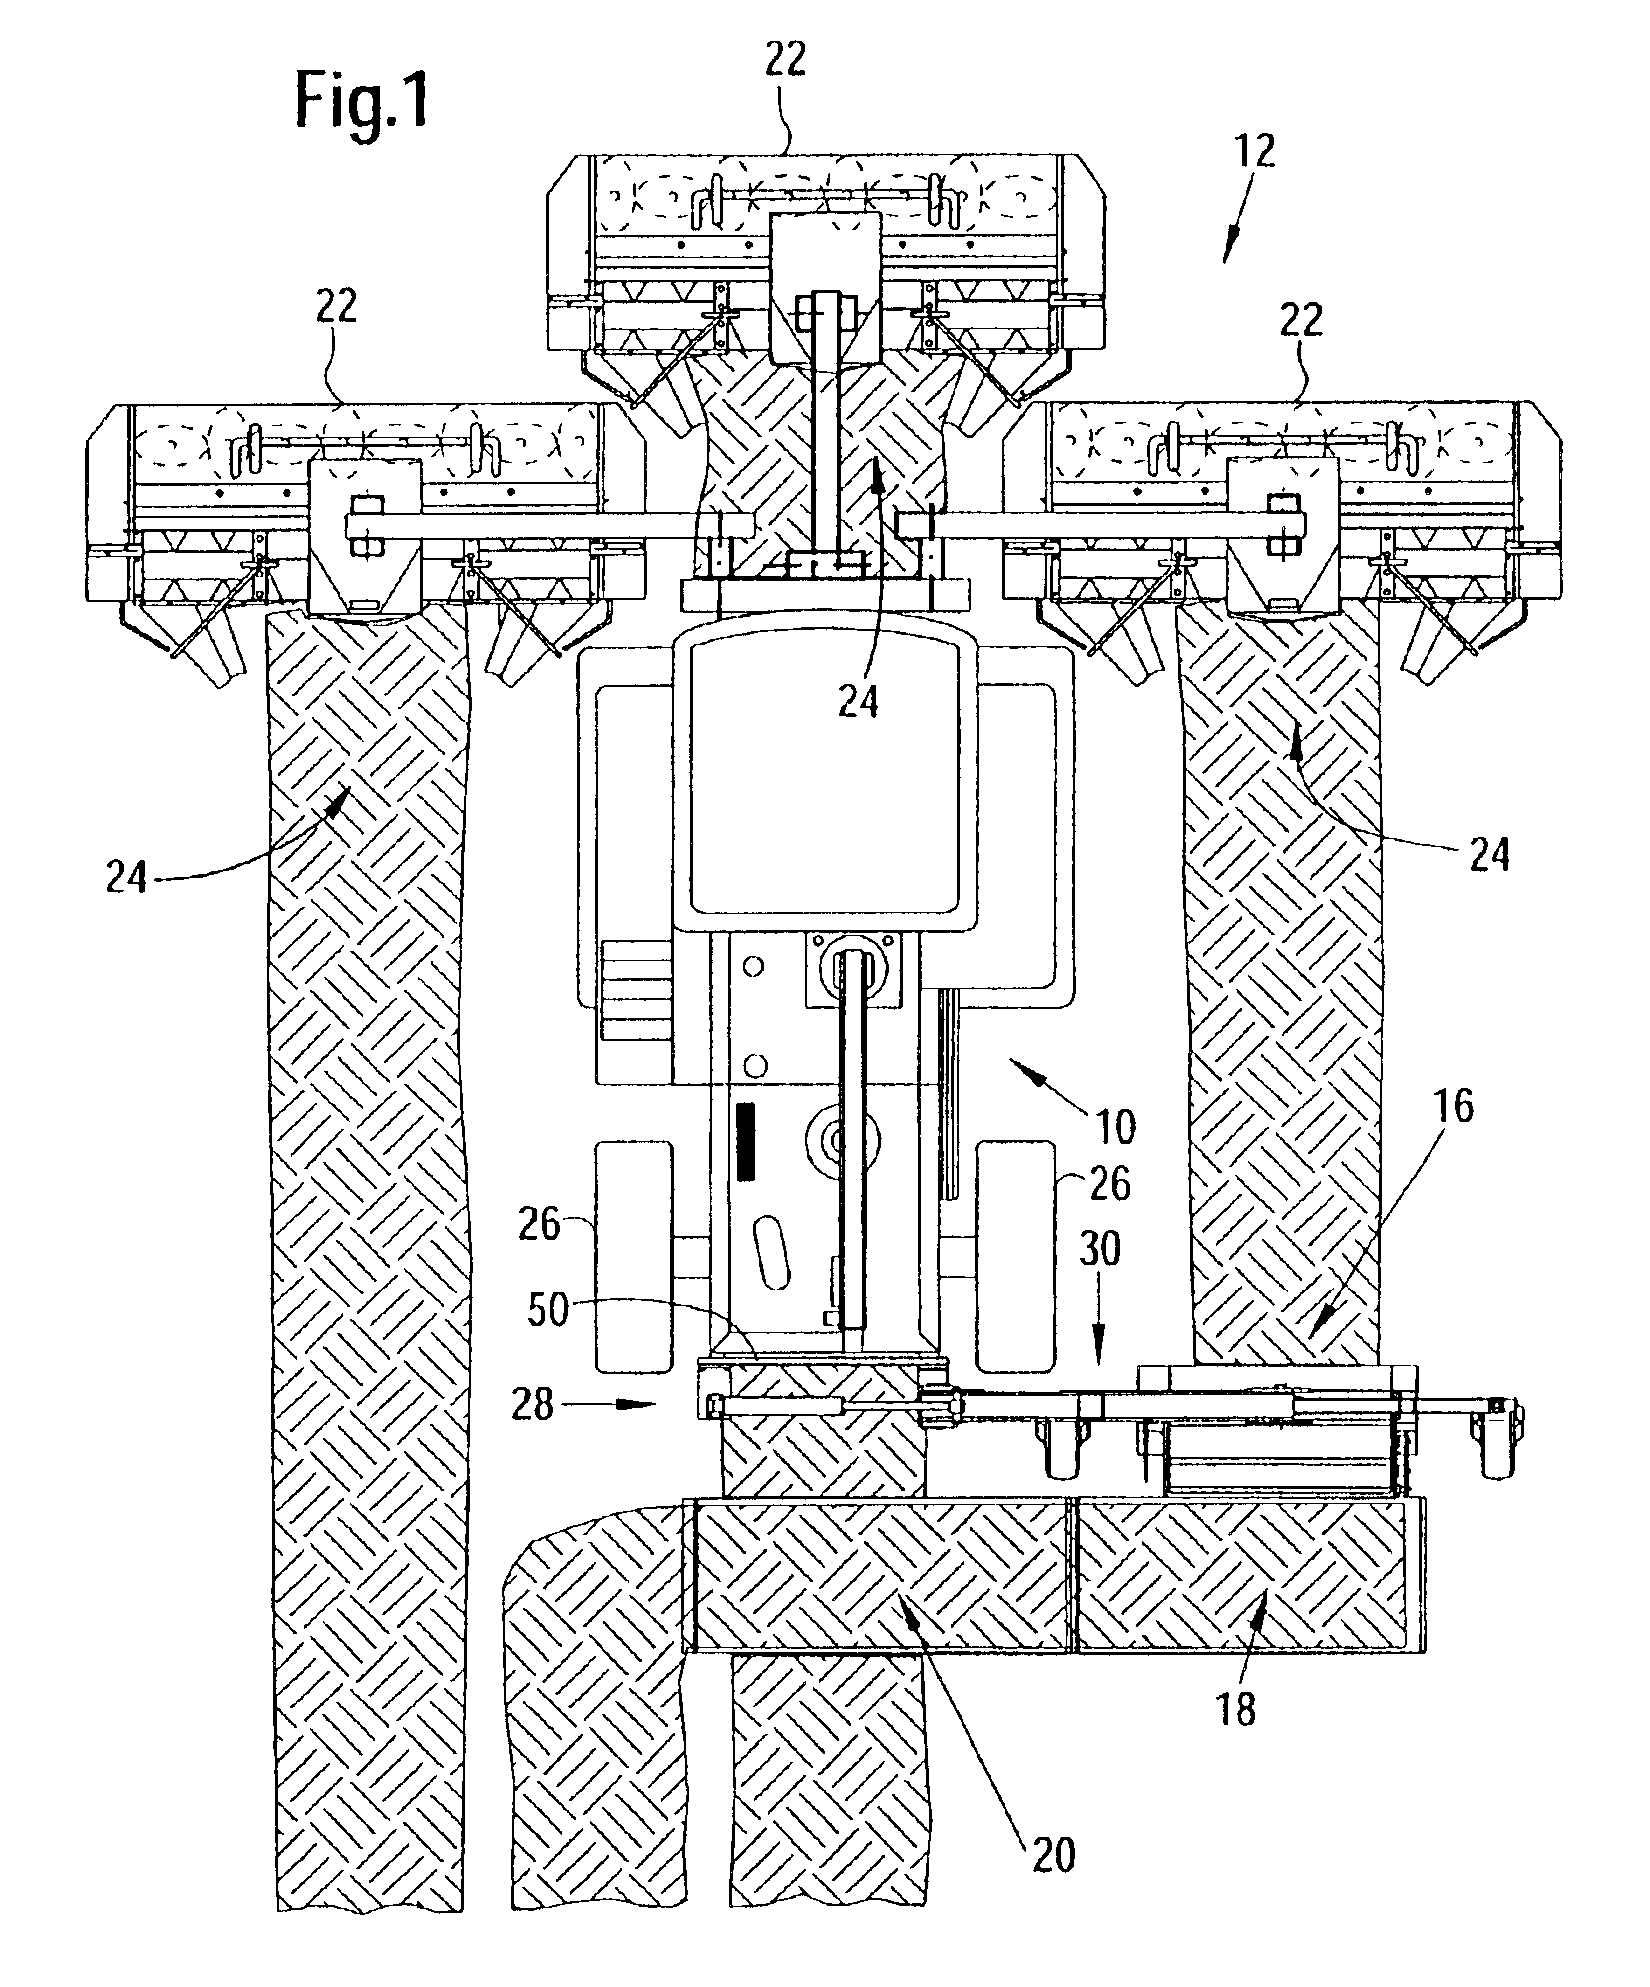 Windrow merging attachment